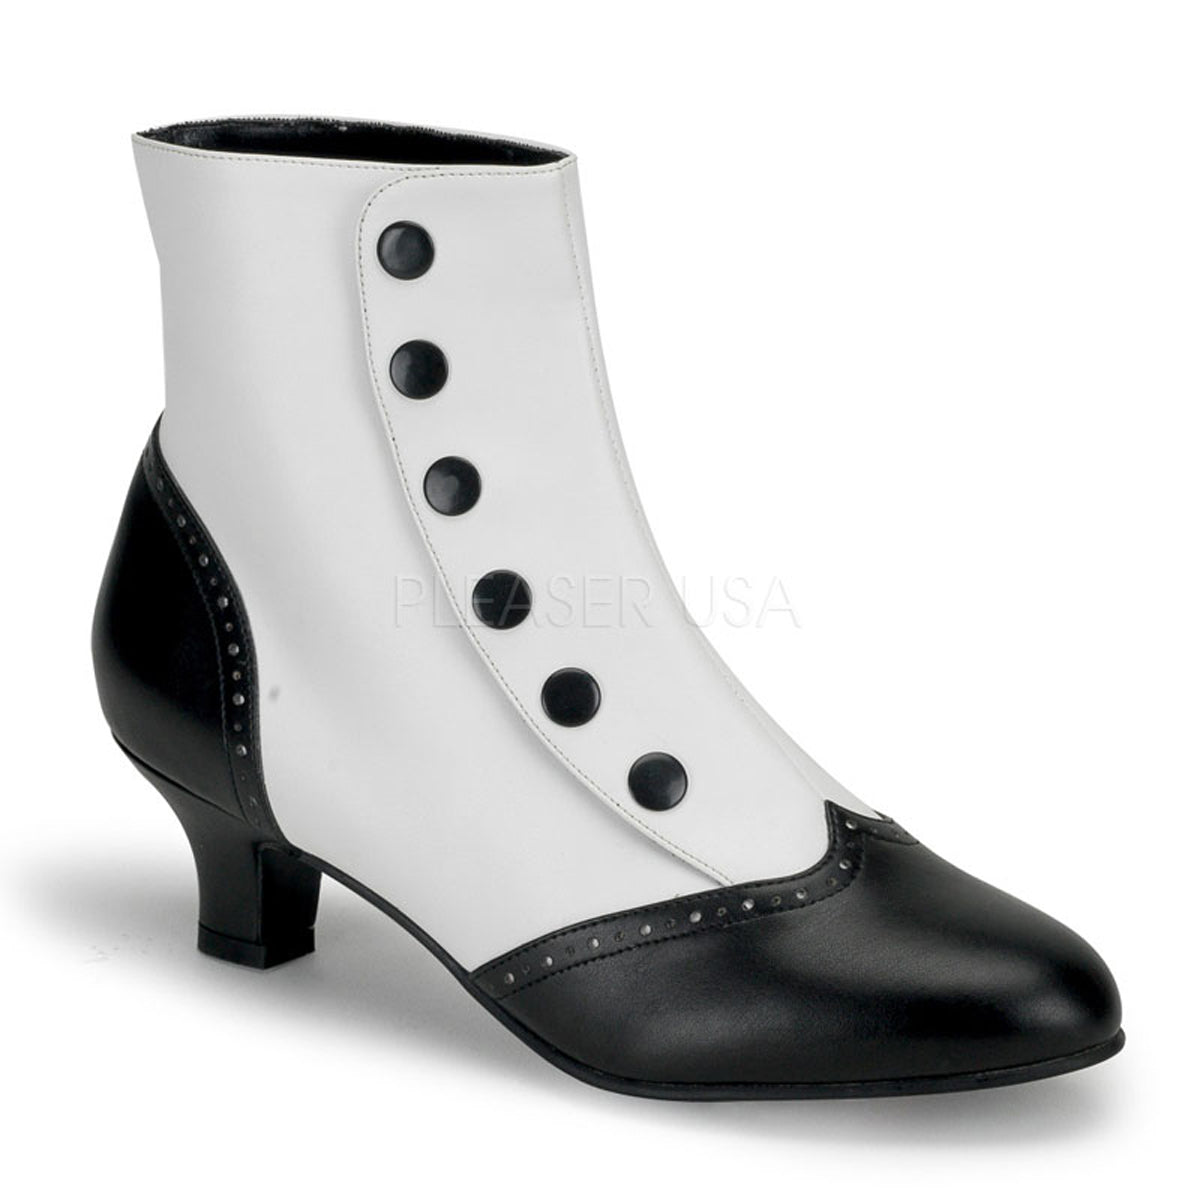 Victorian style black and white boots